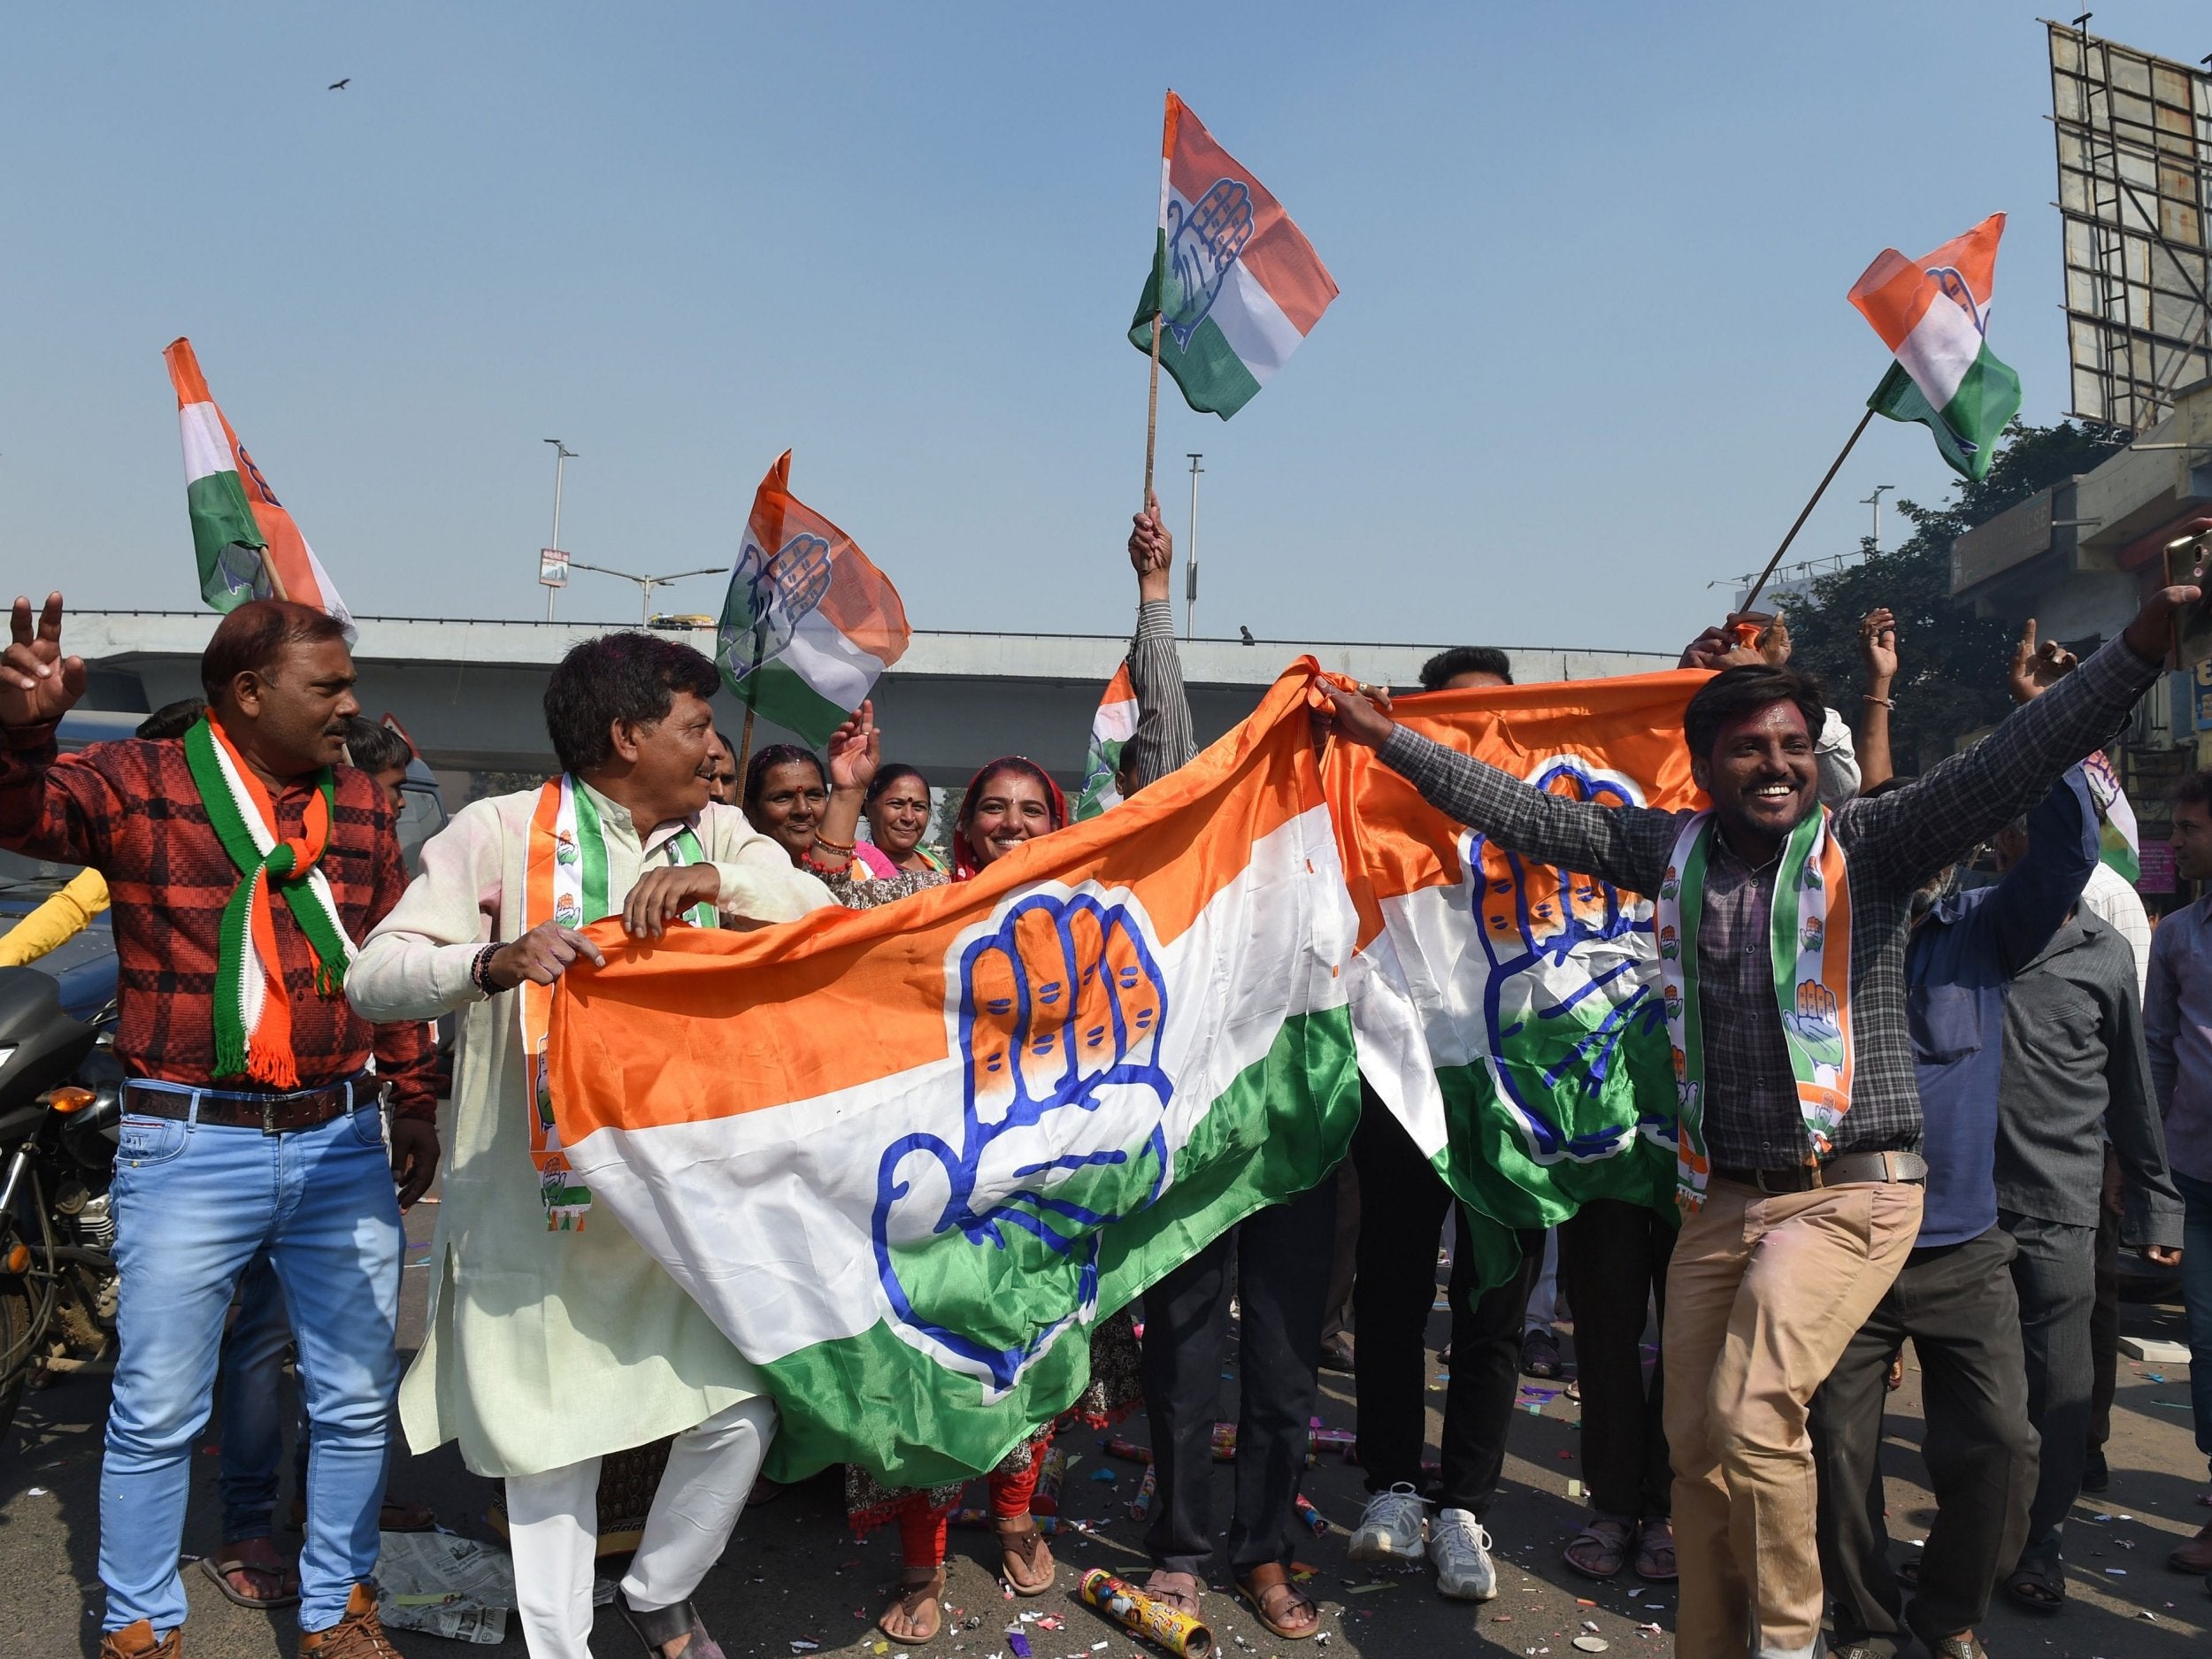 Indian Congress party supporters hold their party flag as they celebrate in Ahmedabad